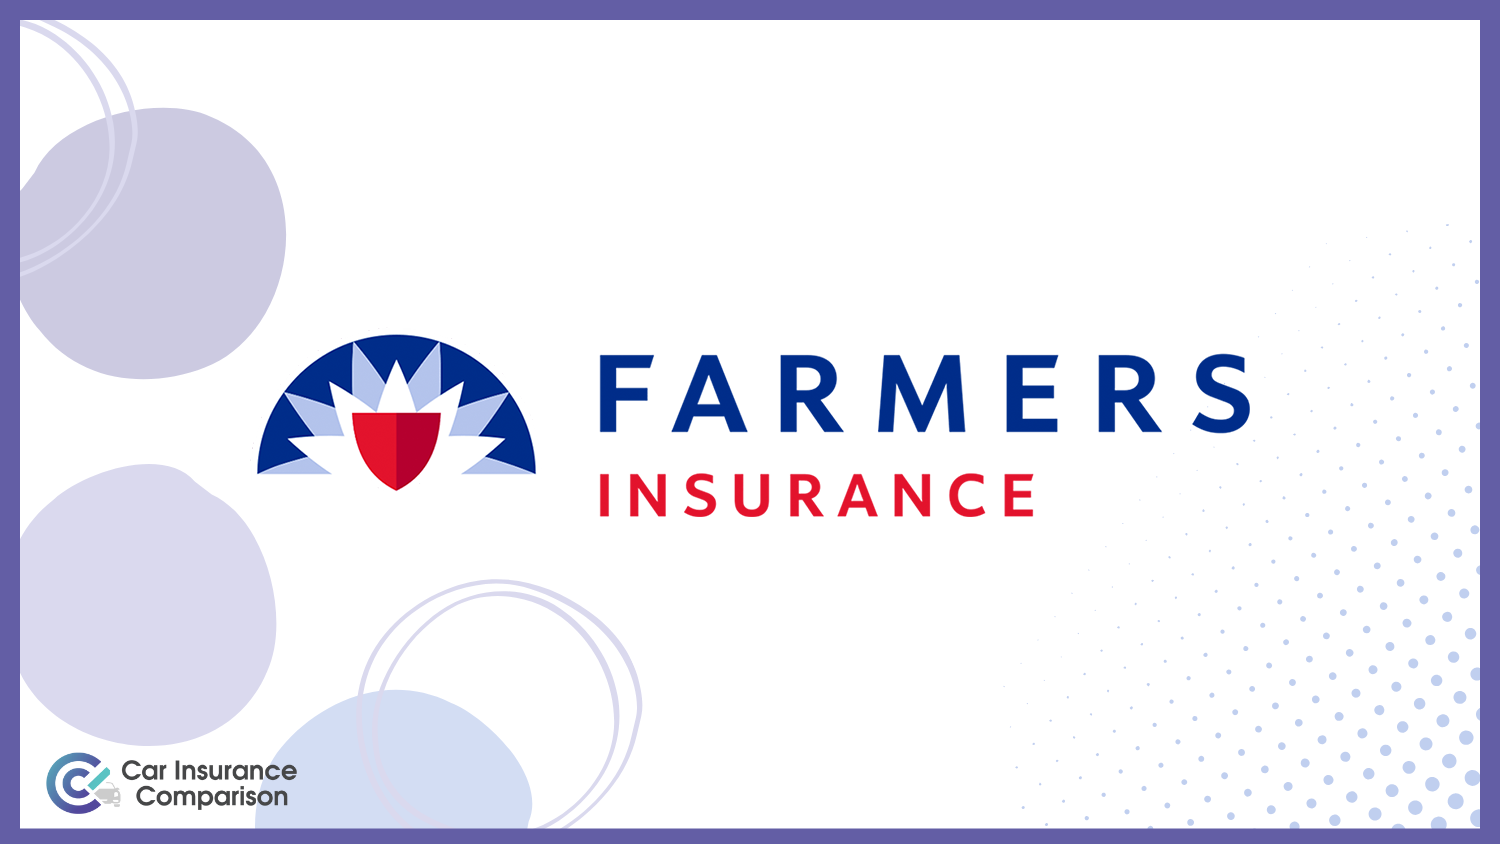 Farmers: Best Car Insurance for Drivers With Epilepsy